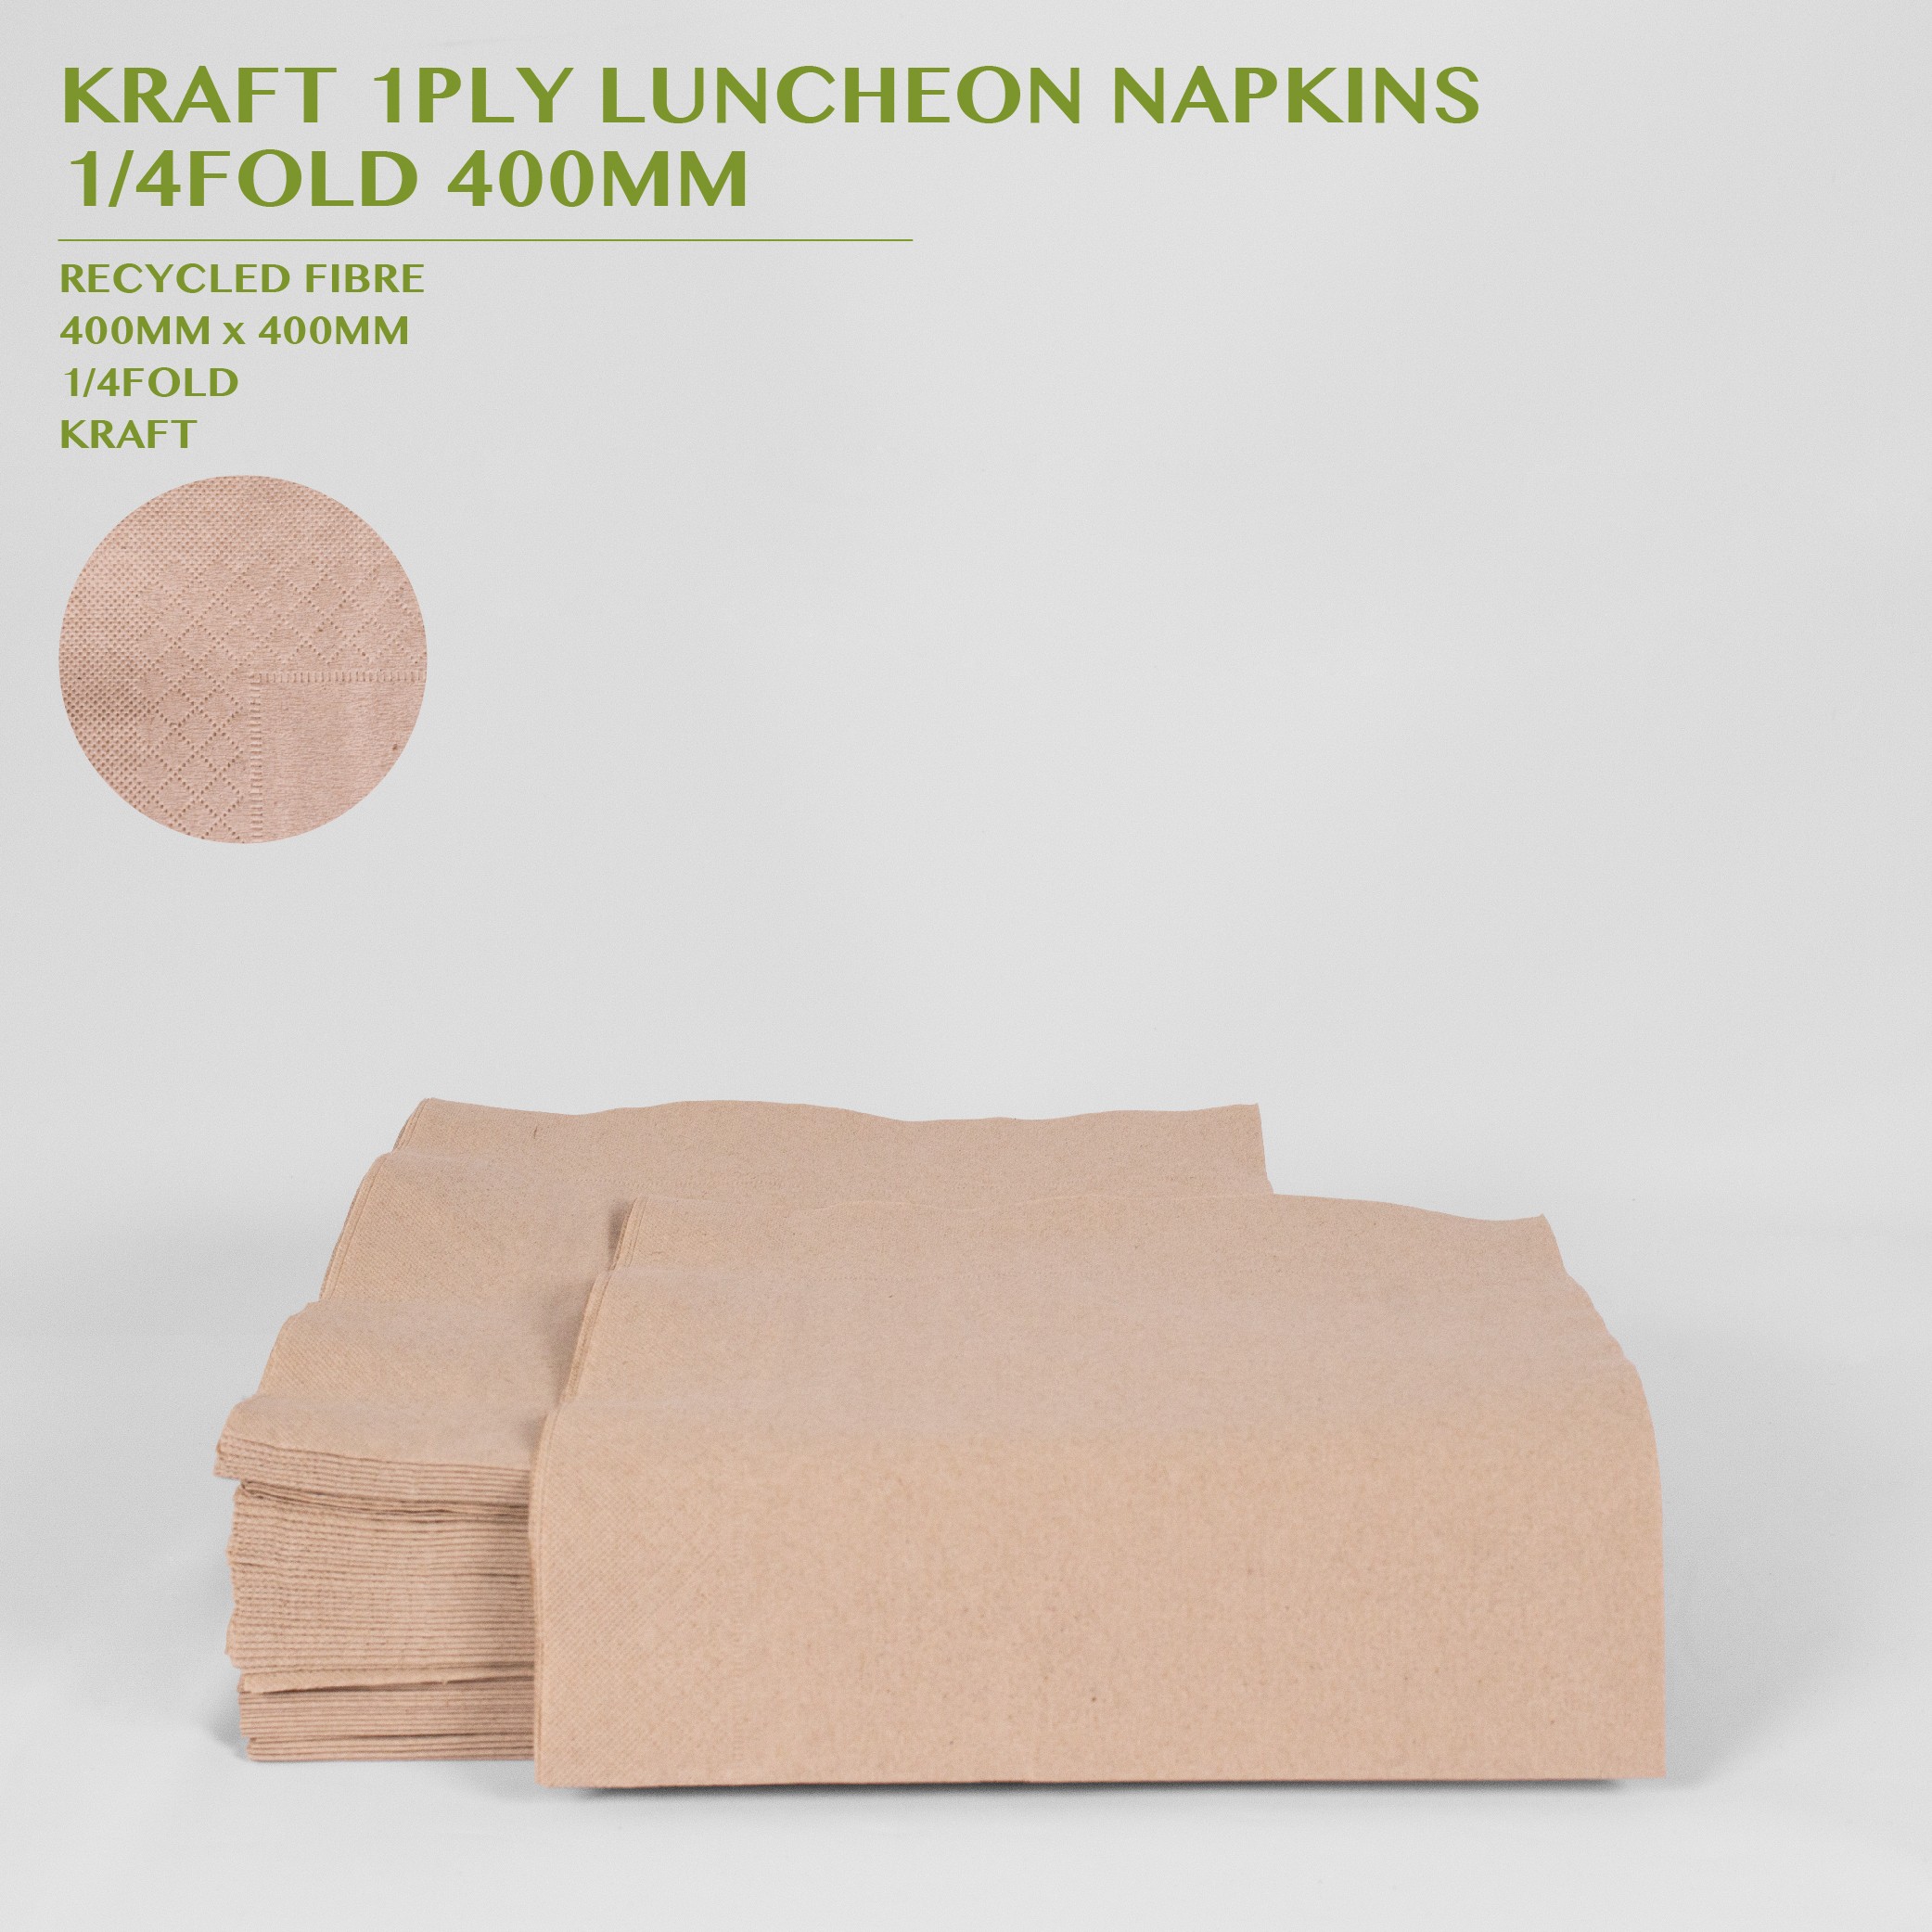 PRE-ORDER KRAFT 1PLY LUNCHEON NAPKINS  1/4FOLD 400MM 250PACK